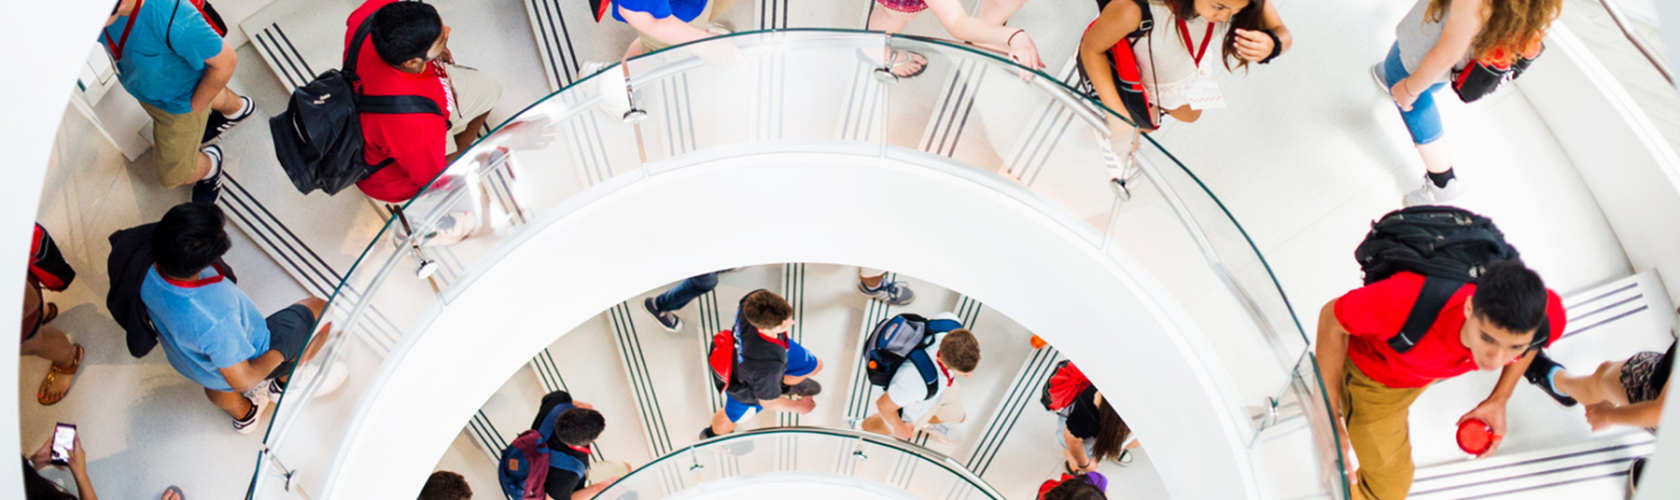 Students ascending and descending a spiral staircase